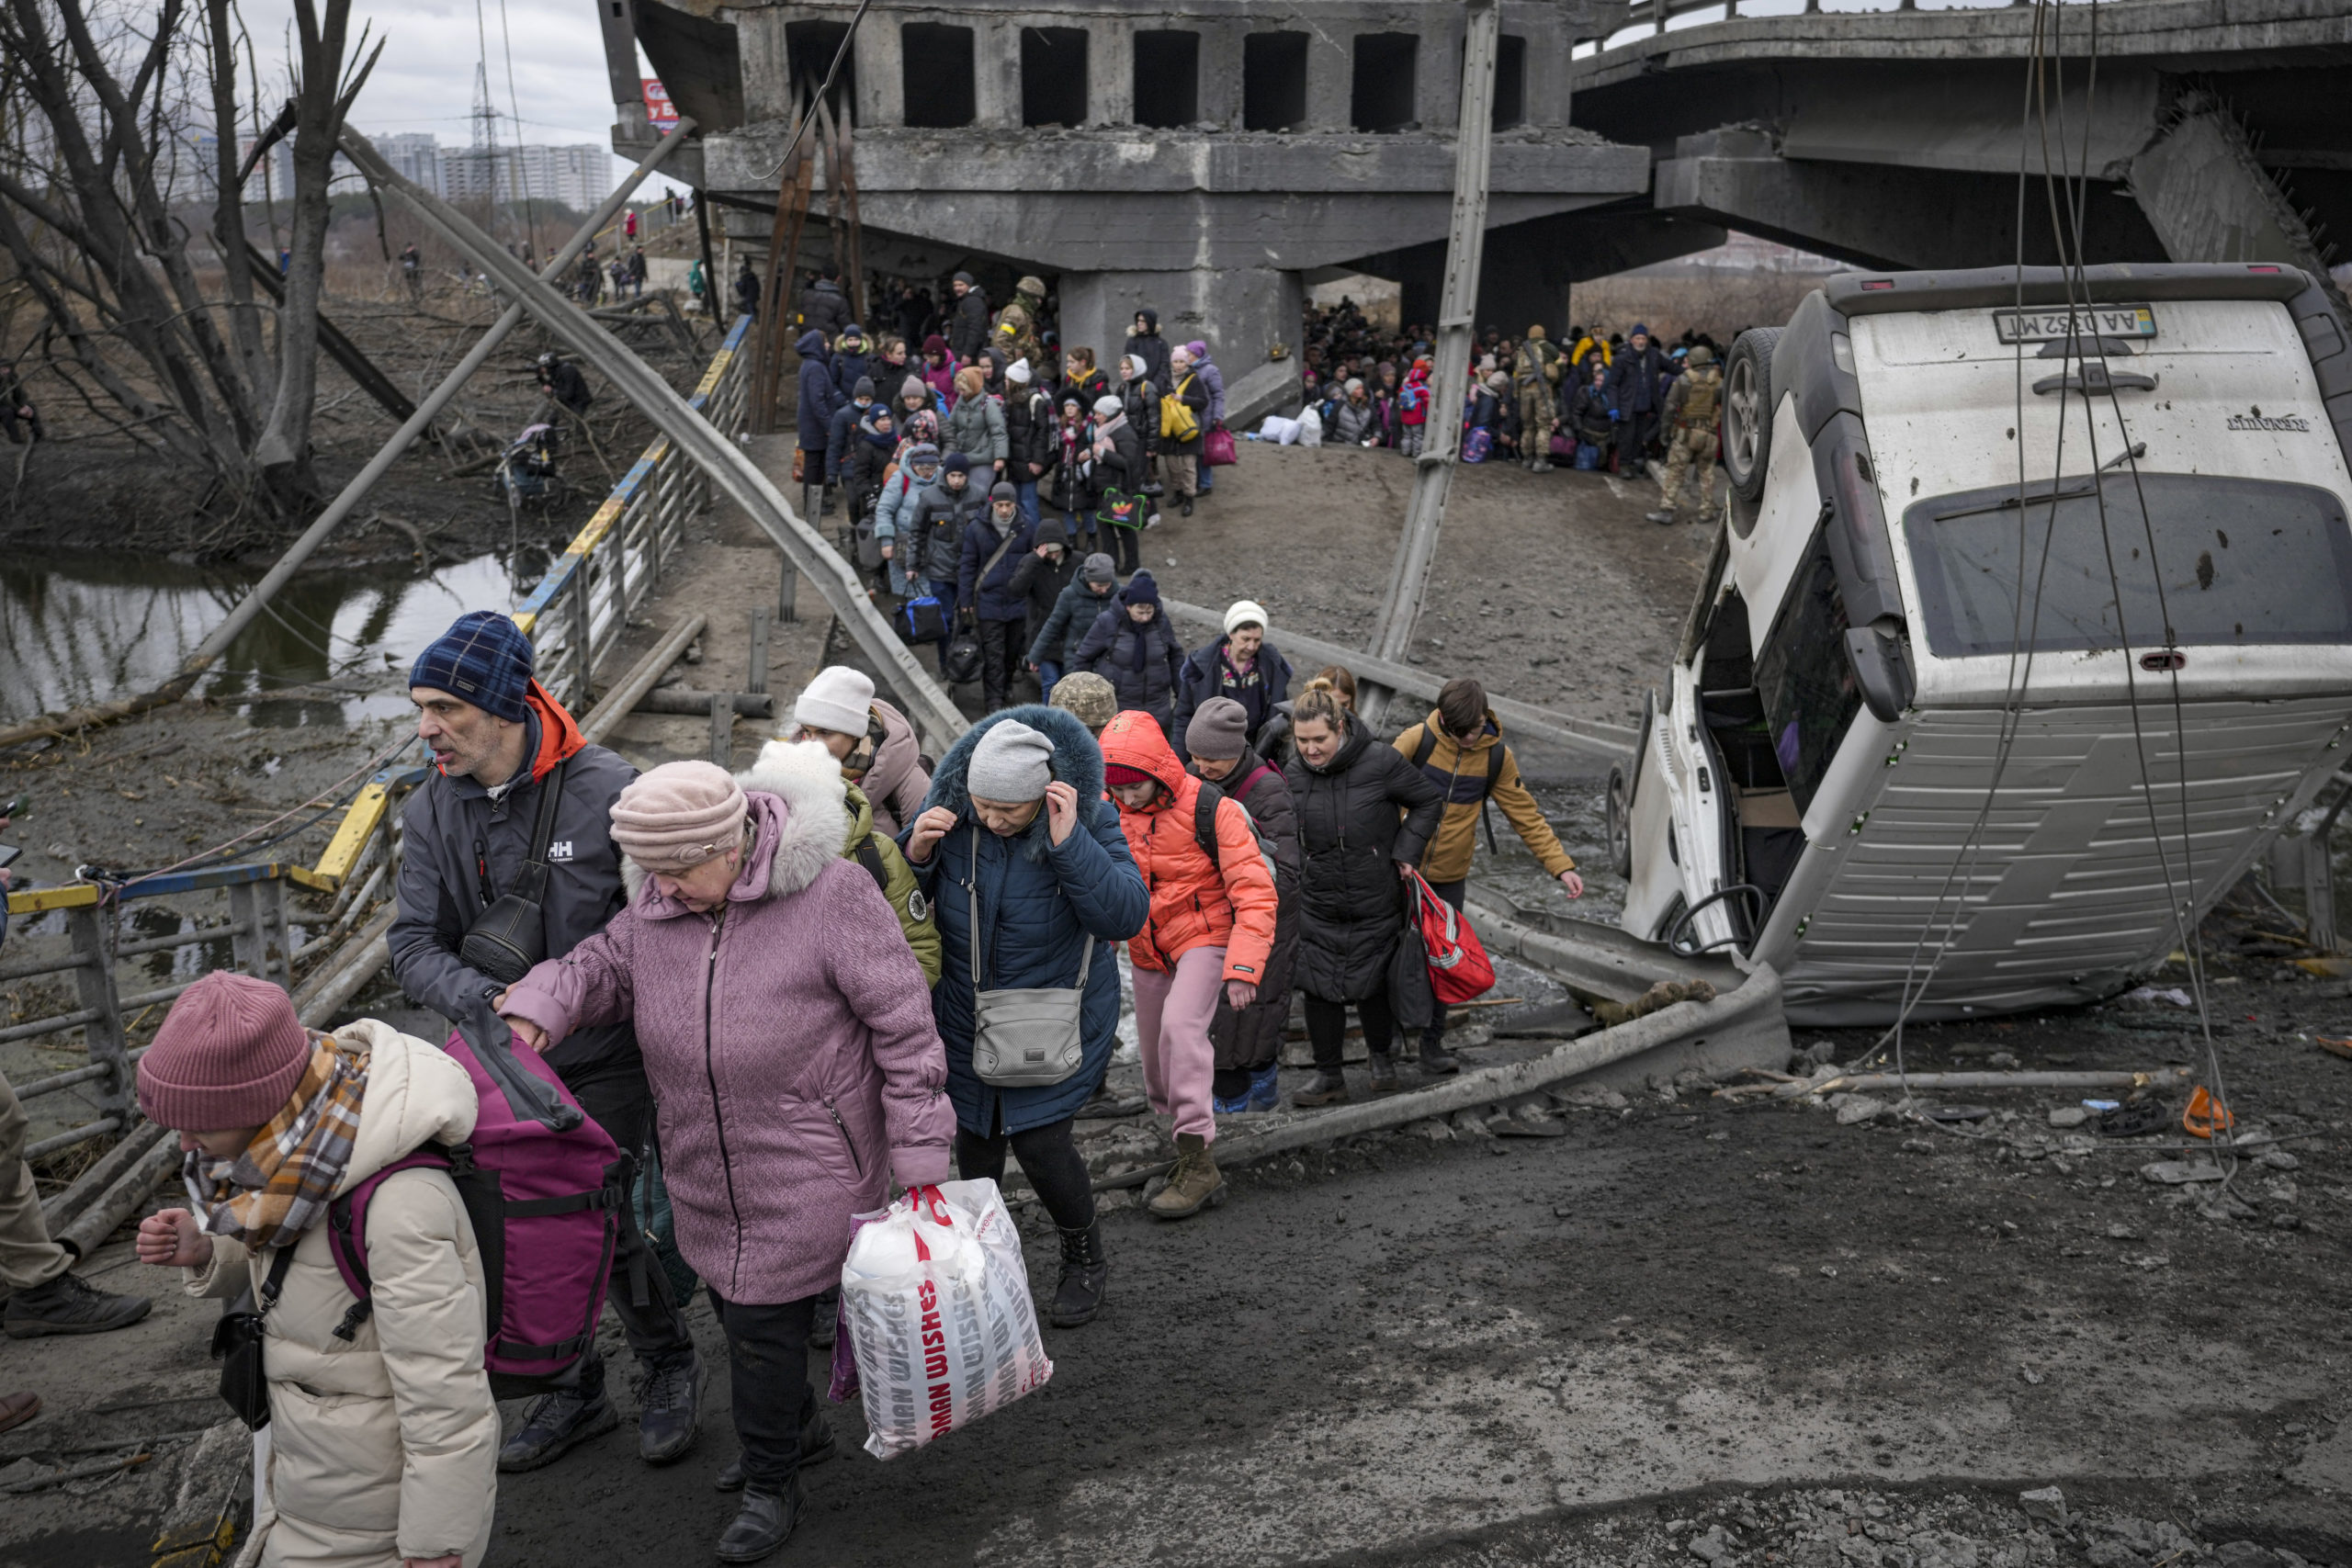 People cross the Irpin river on an improvised path under a bridge, that was destroyed by Ukrainian troops designed to slow any Russian military advance, while fleeing the town of Irpin, Ukraine, March 5, 2022